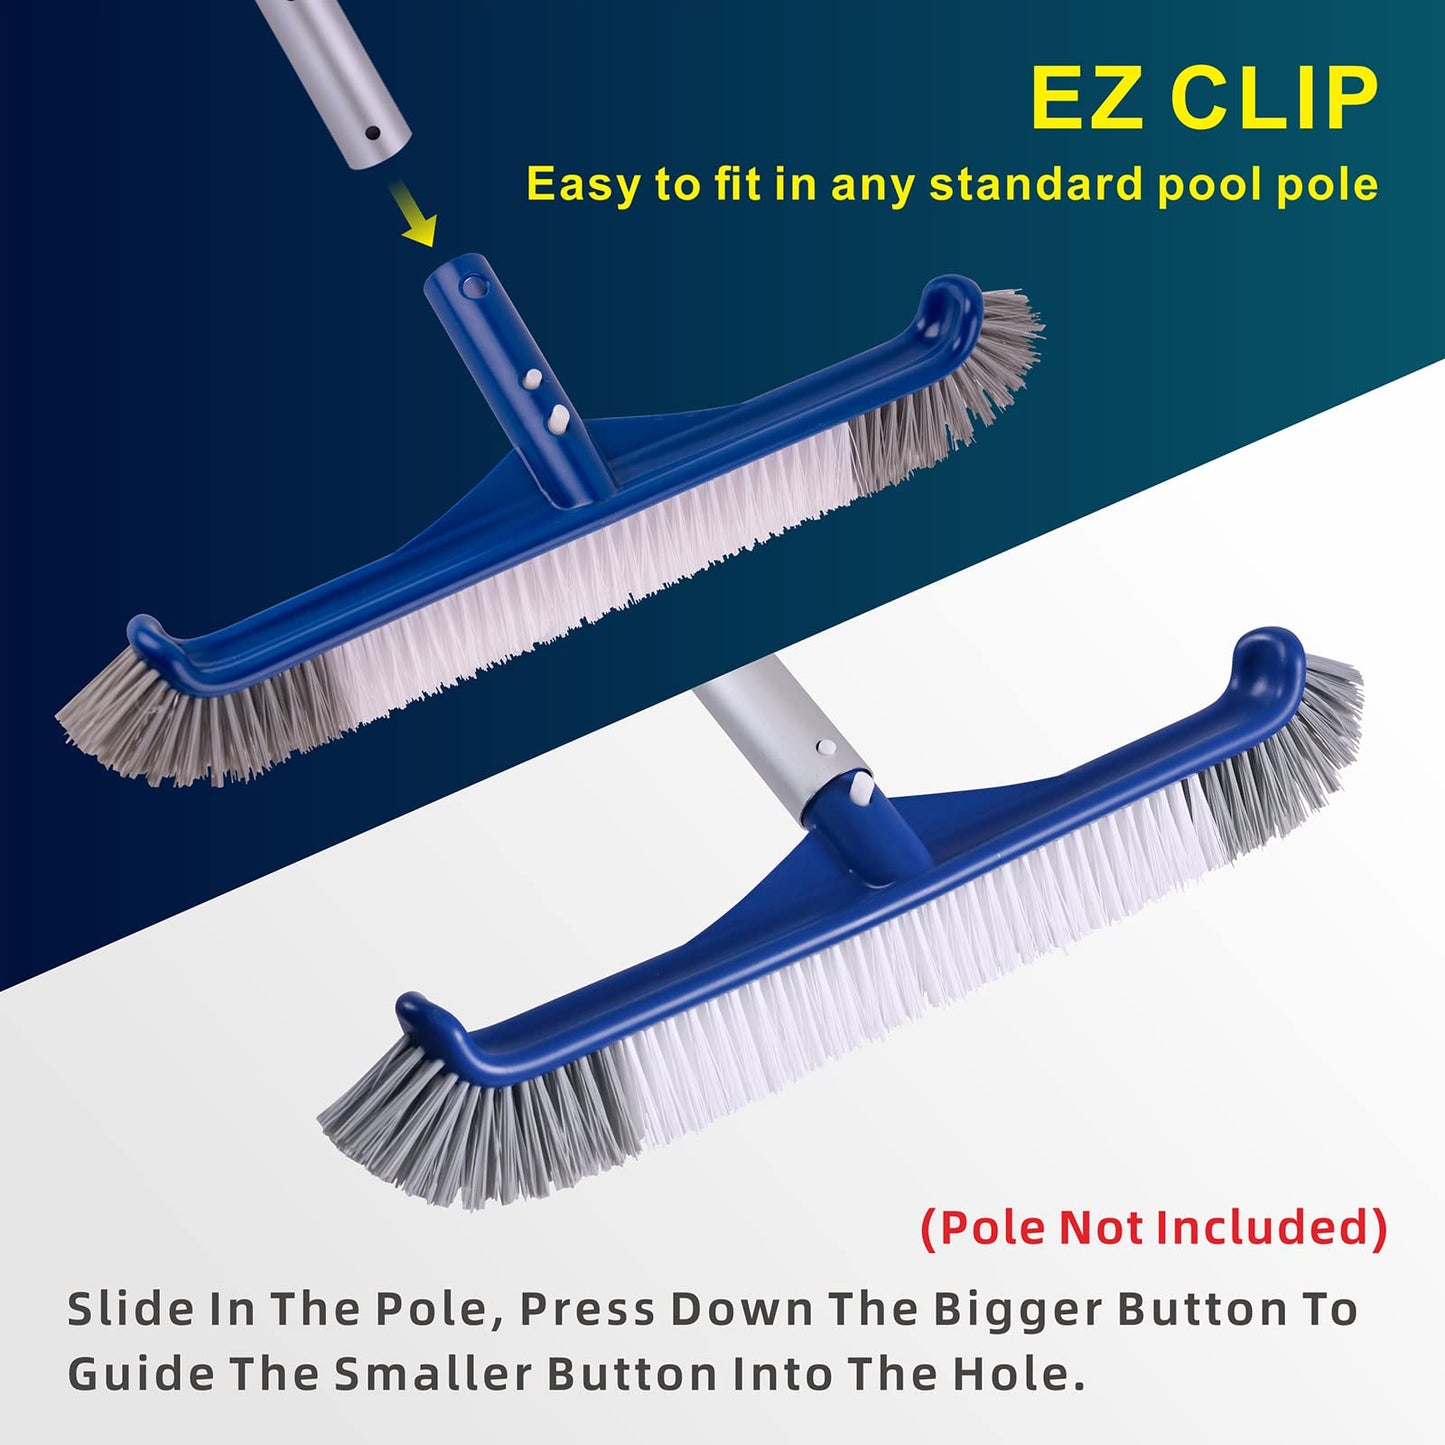 POOLAZA Pool Brush, 17.5" Pool Brushes for Cleaning Pool Walls, Premium Nylon Bristles Pool Brush Head with EZ Clip, Curved Ends High-Efficiency Pool Scrub Brush